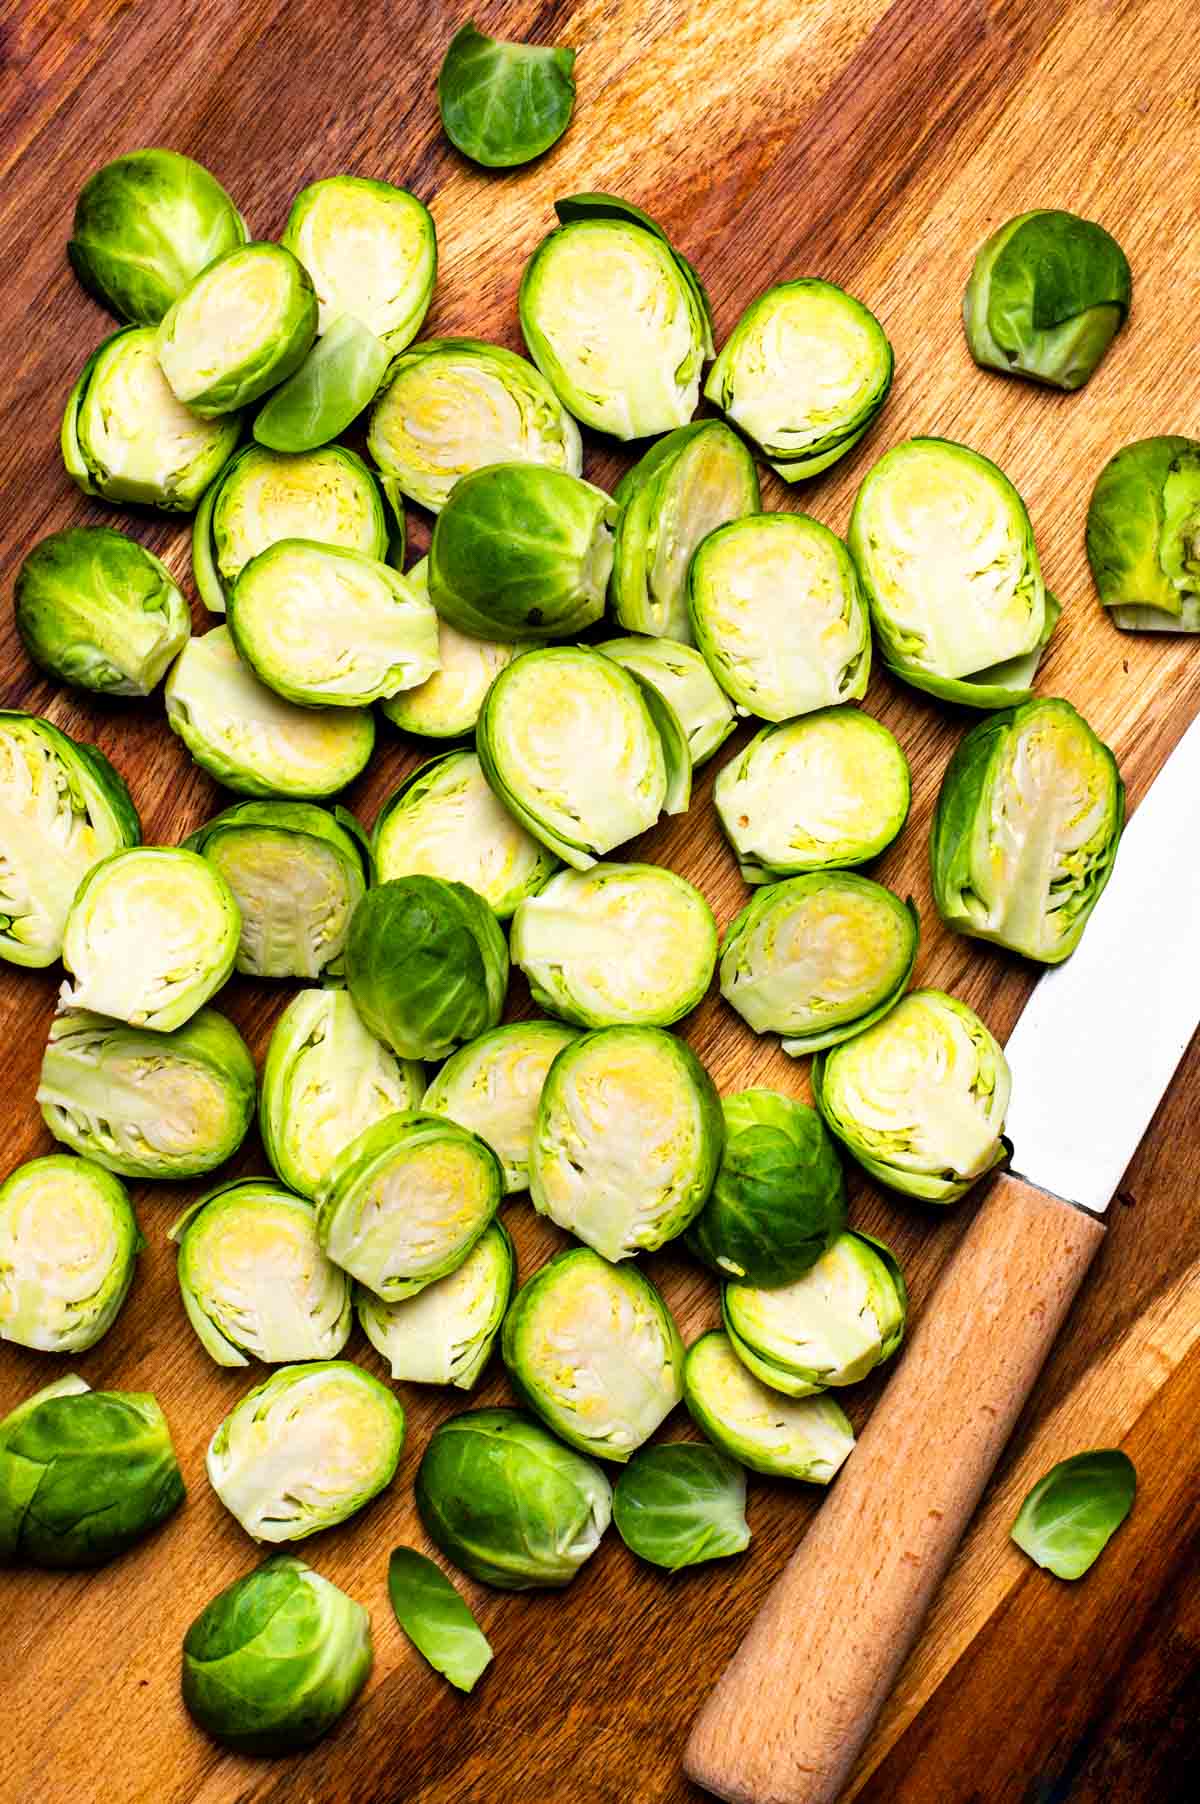 Prepared Brussels sprouts on a cutting board, sliced in half.